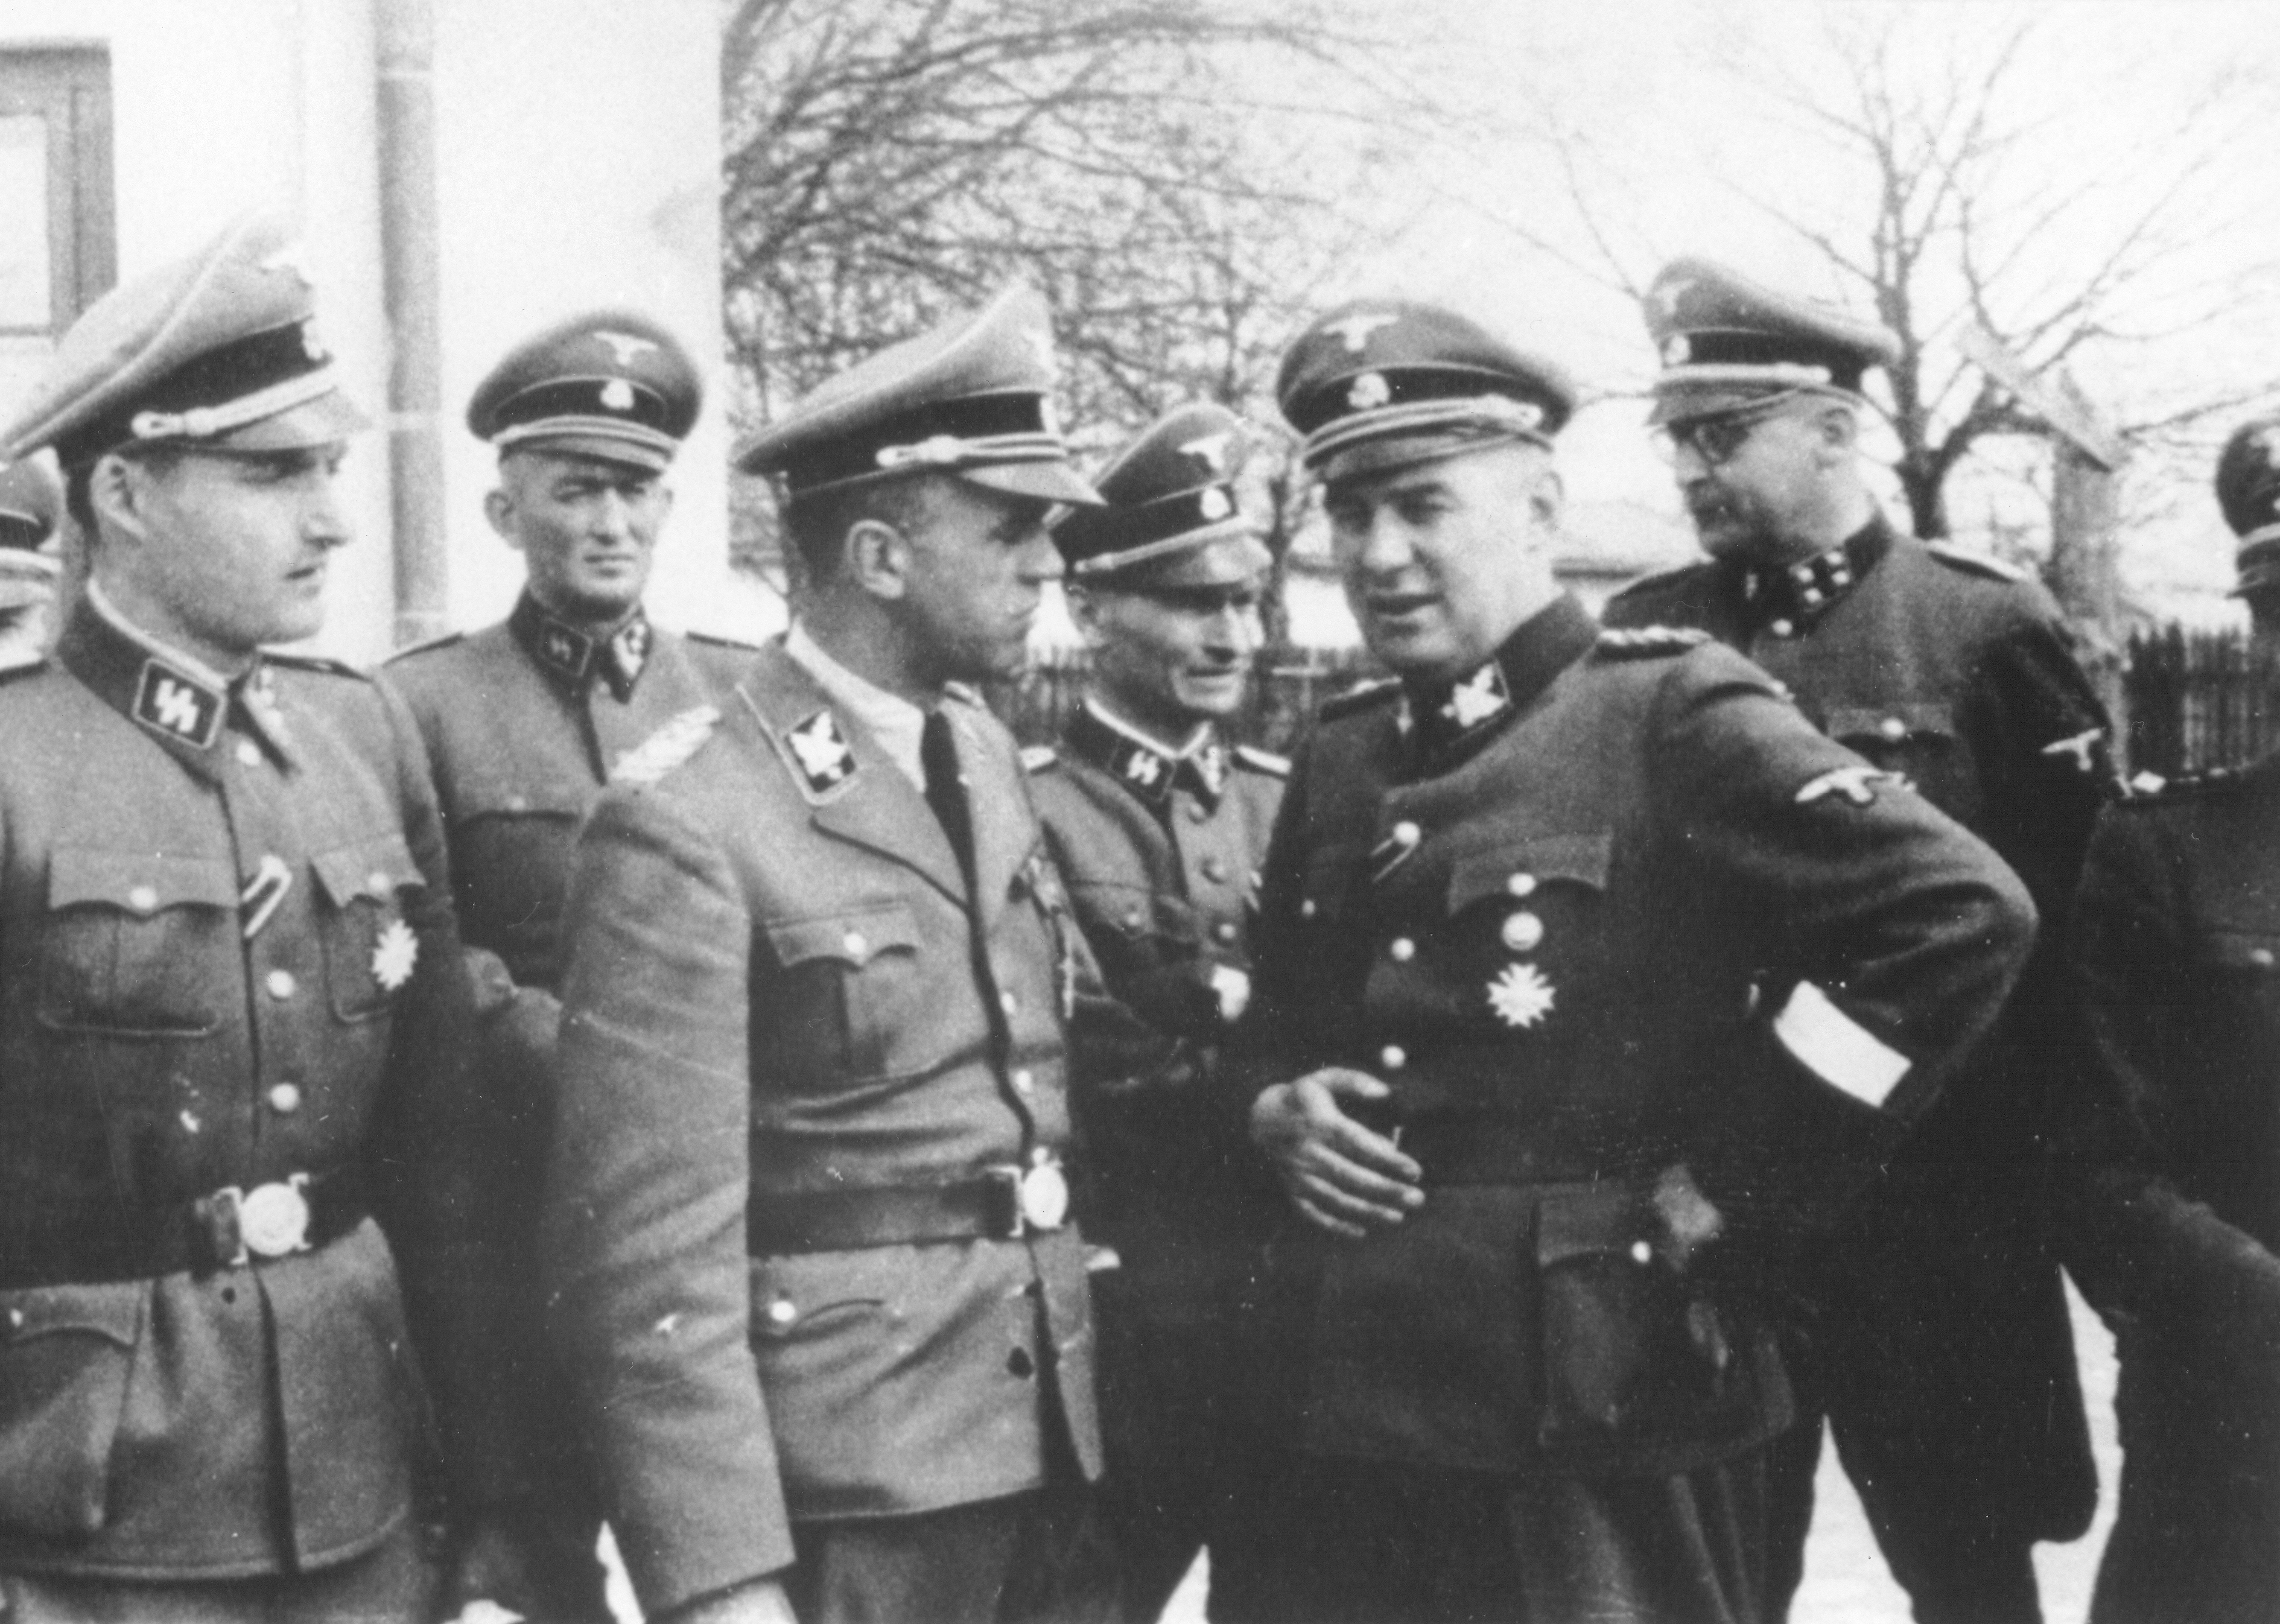 Former Nazi labor camp guard, Jakiw Palij, removed to Germany